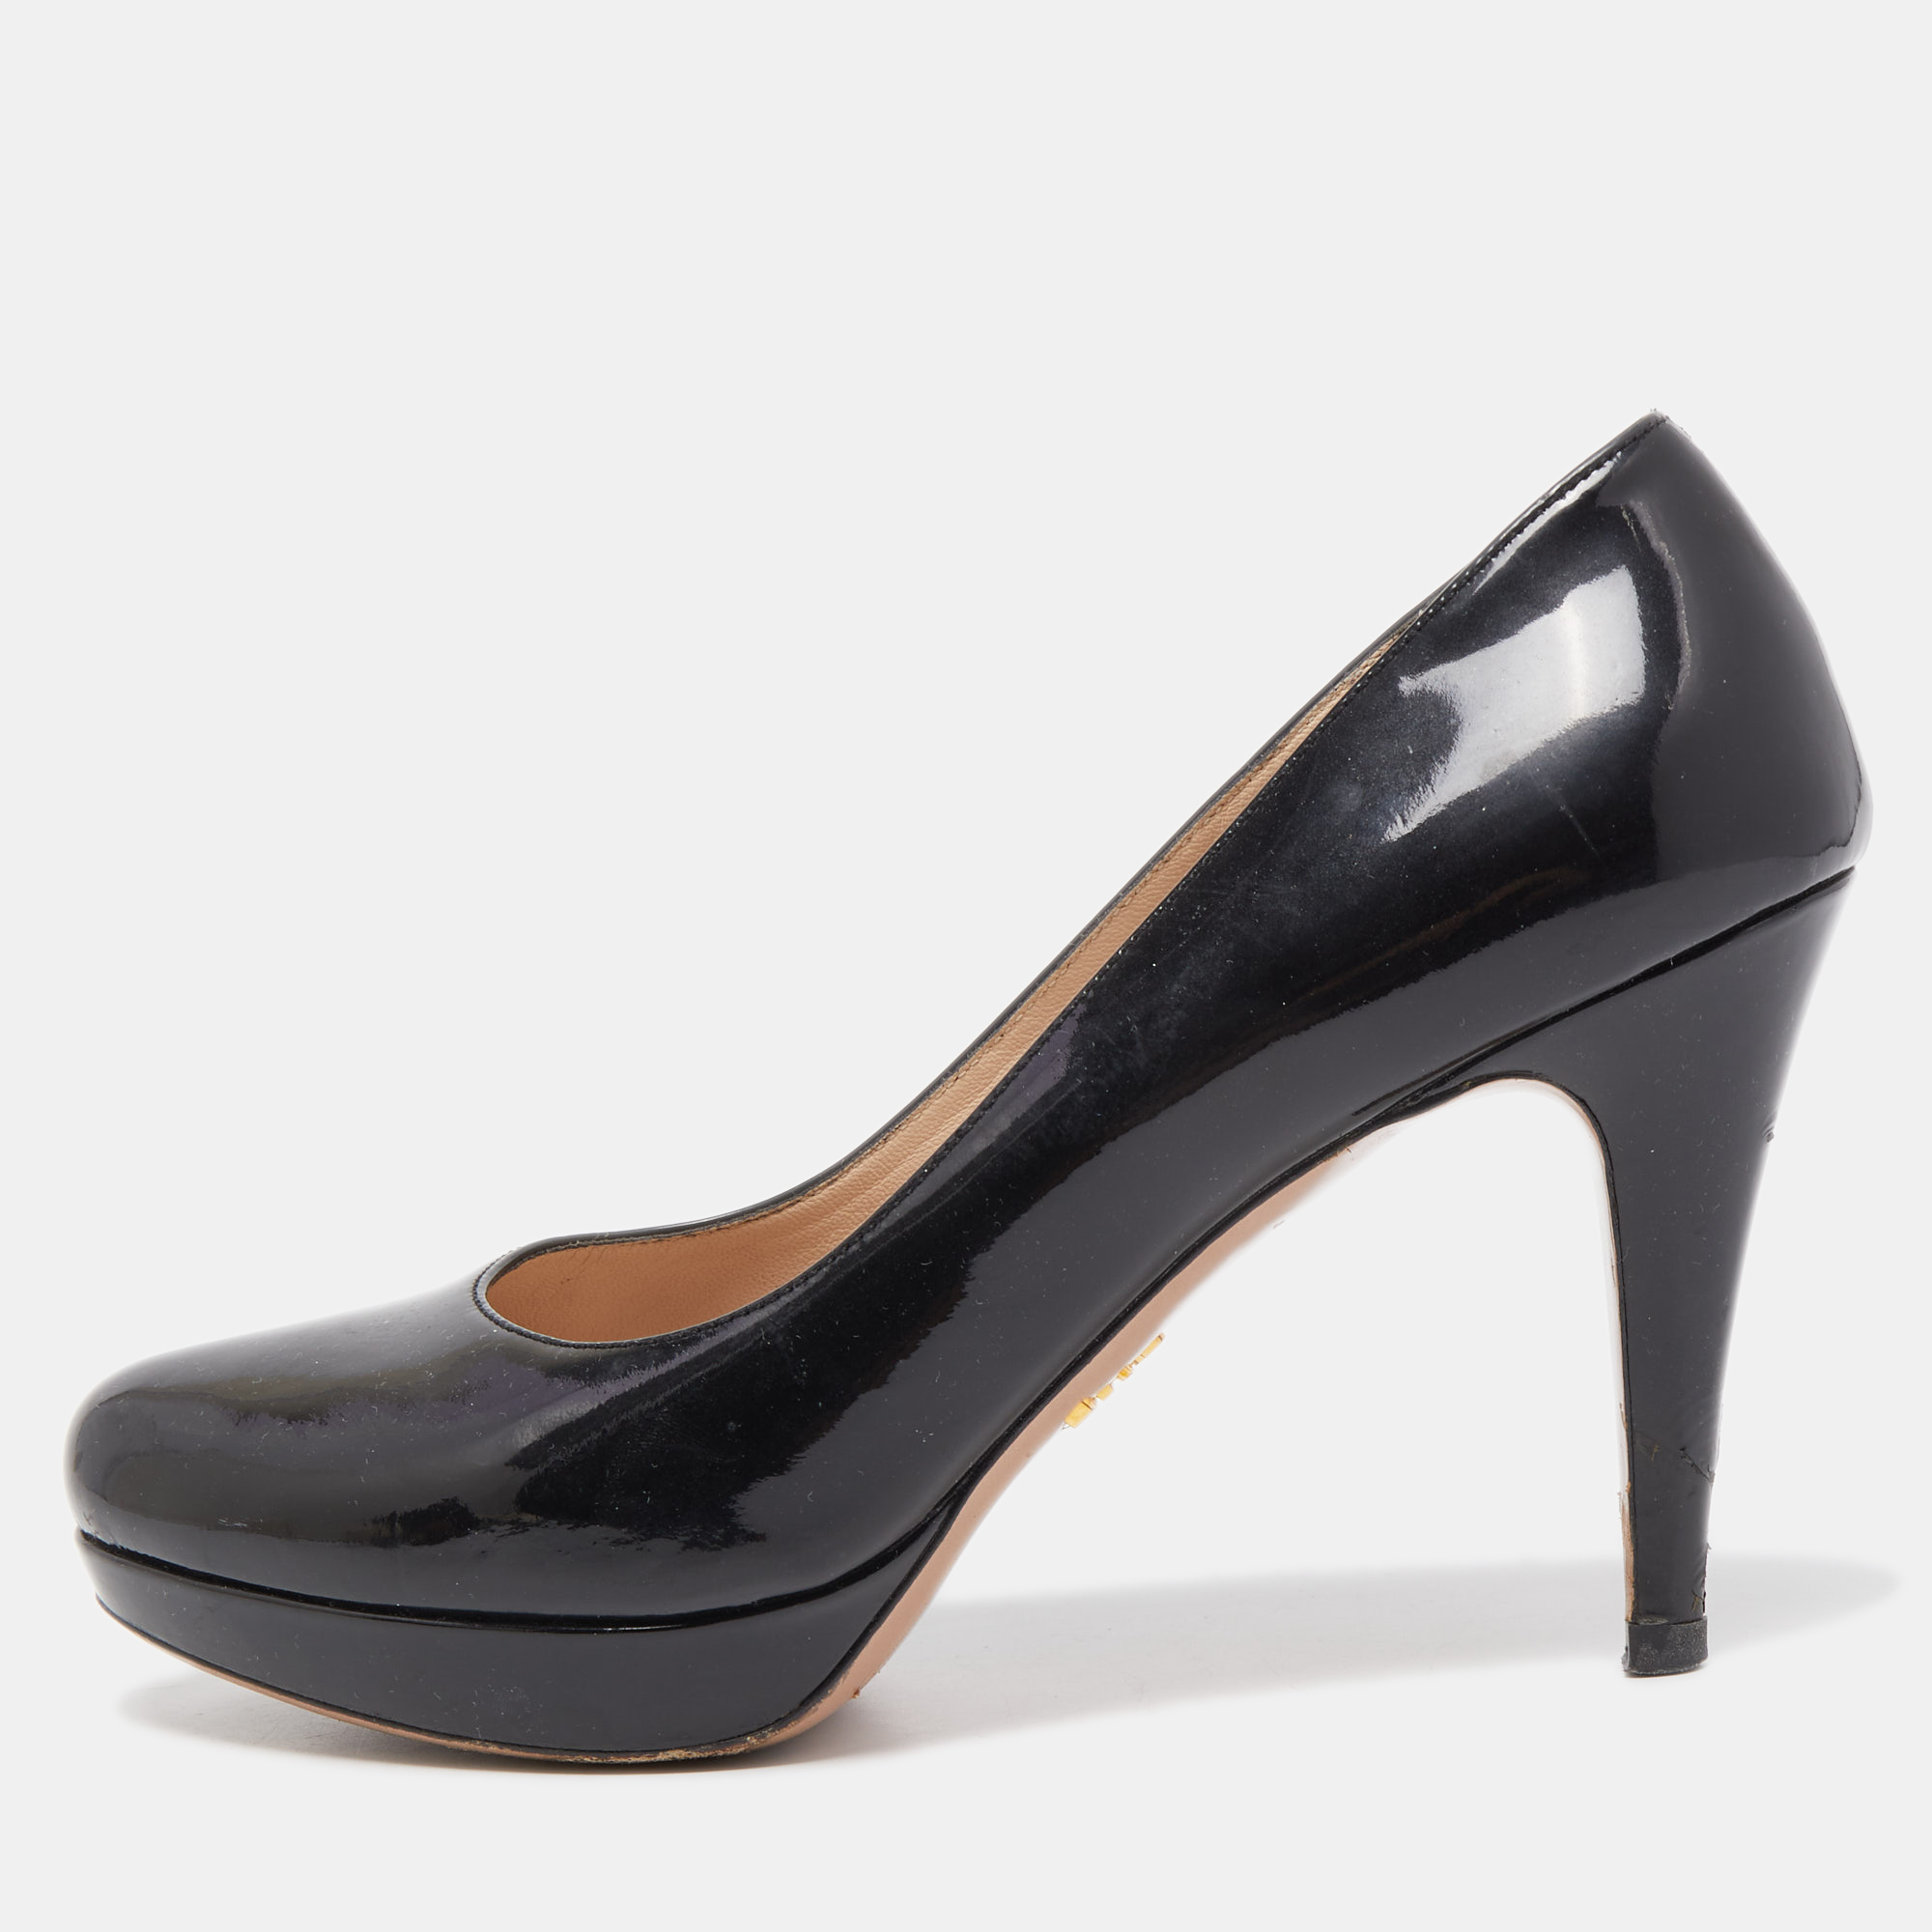 Pre-owned Prada Black Patent Leather Pumps Size 37.5